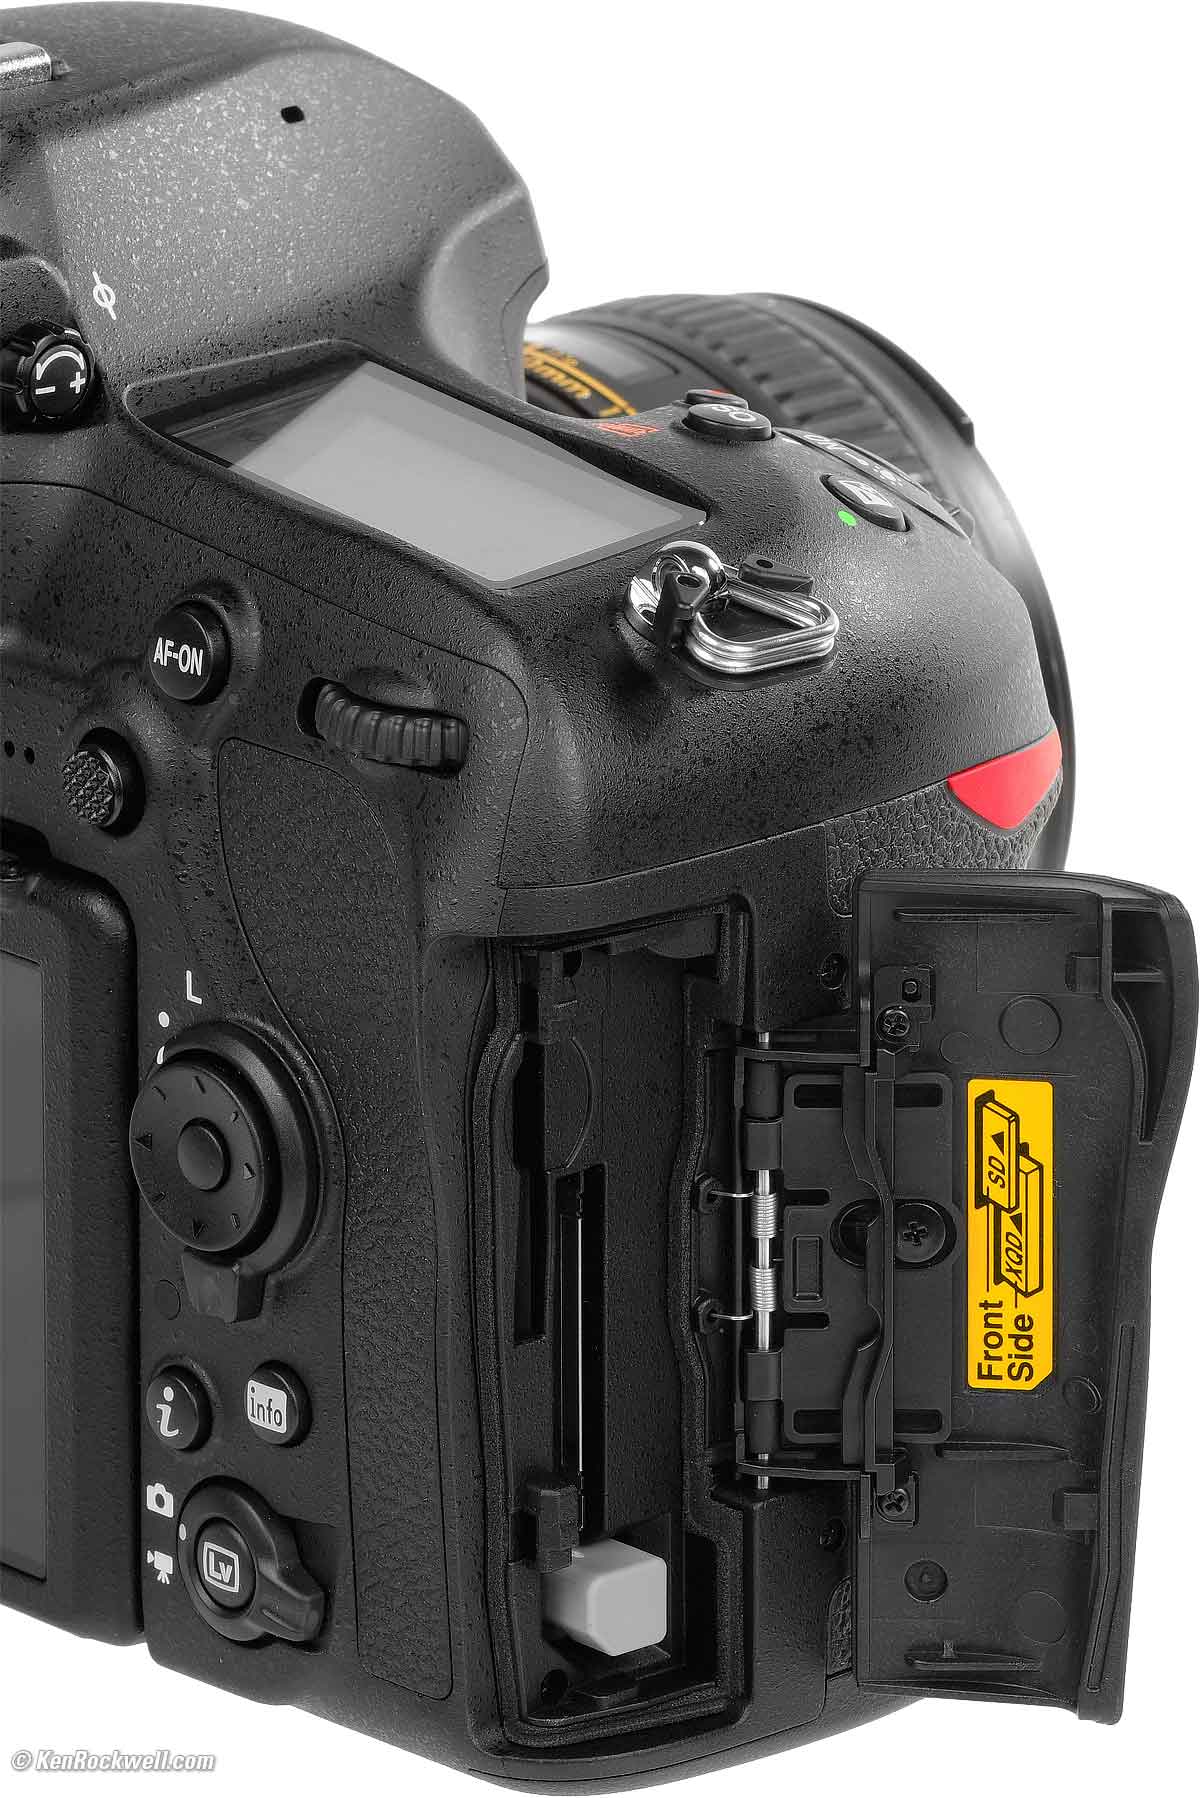 Nikon Just Slashed the Price of the D850: Is a Replacement on the Way?